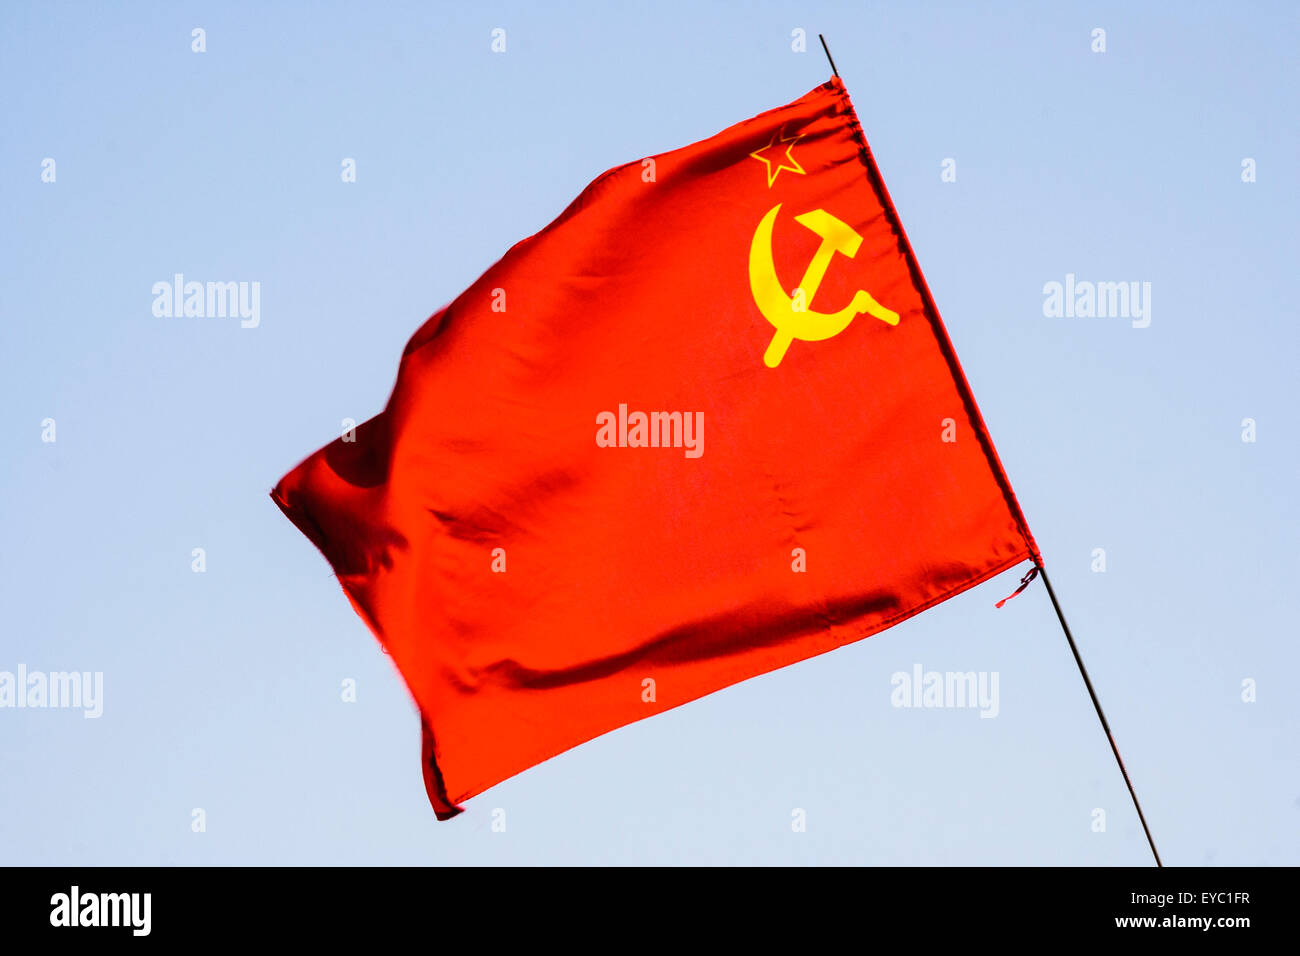 Communist flag of Russia, red flag, with yellow star outline and hammer and sickle below that. Blue sky background. Stock Photo